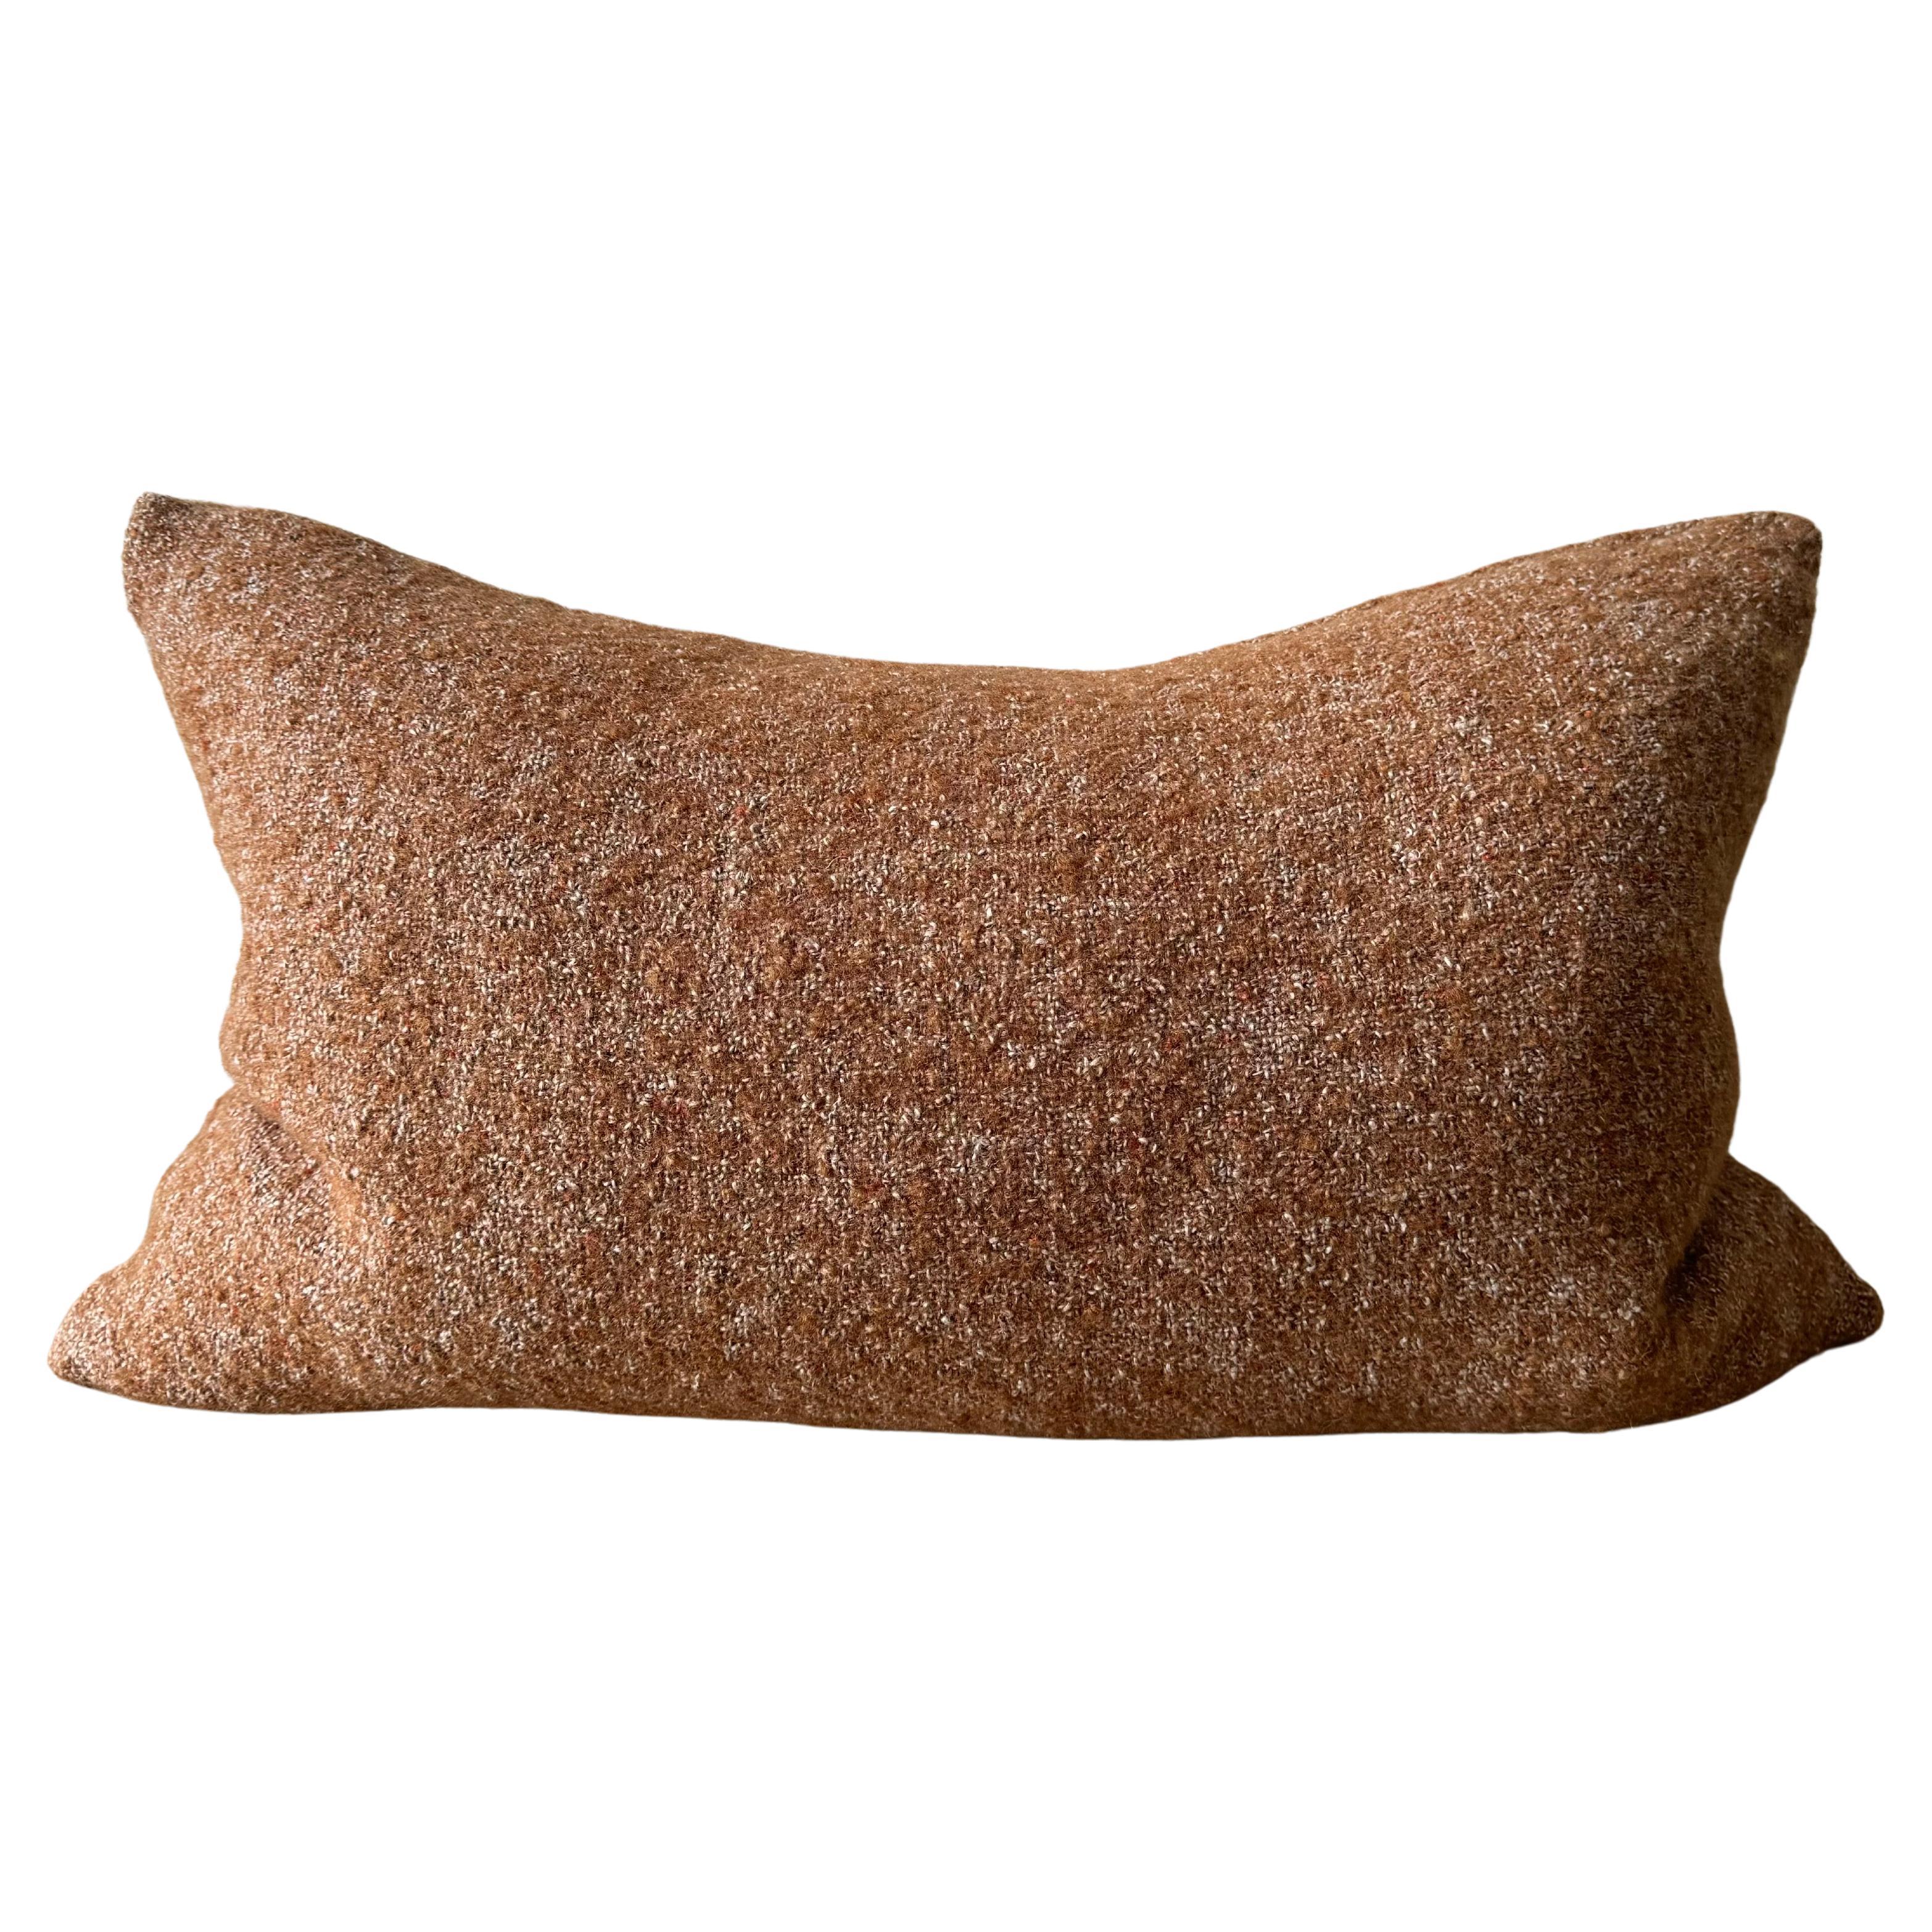 Custom Made Linen and Wool Blend Pillow with Down Feather Insert For Sale